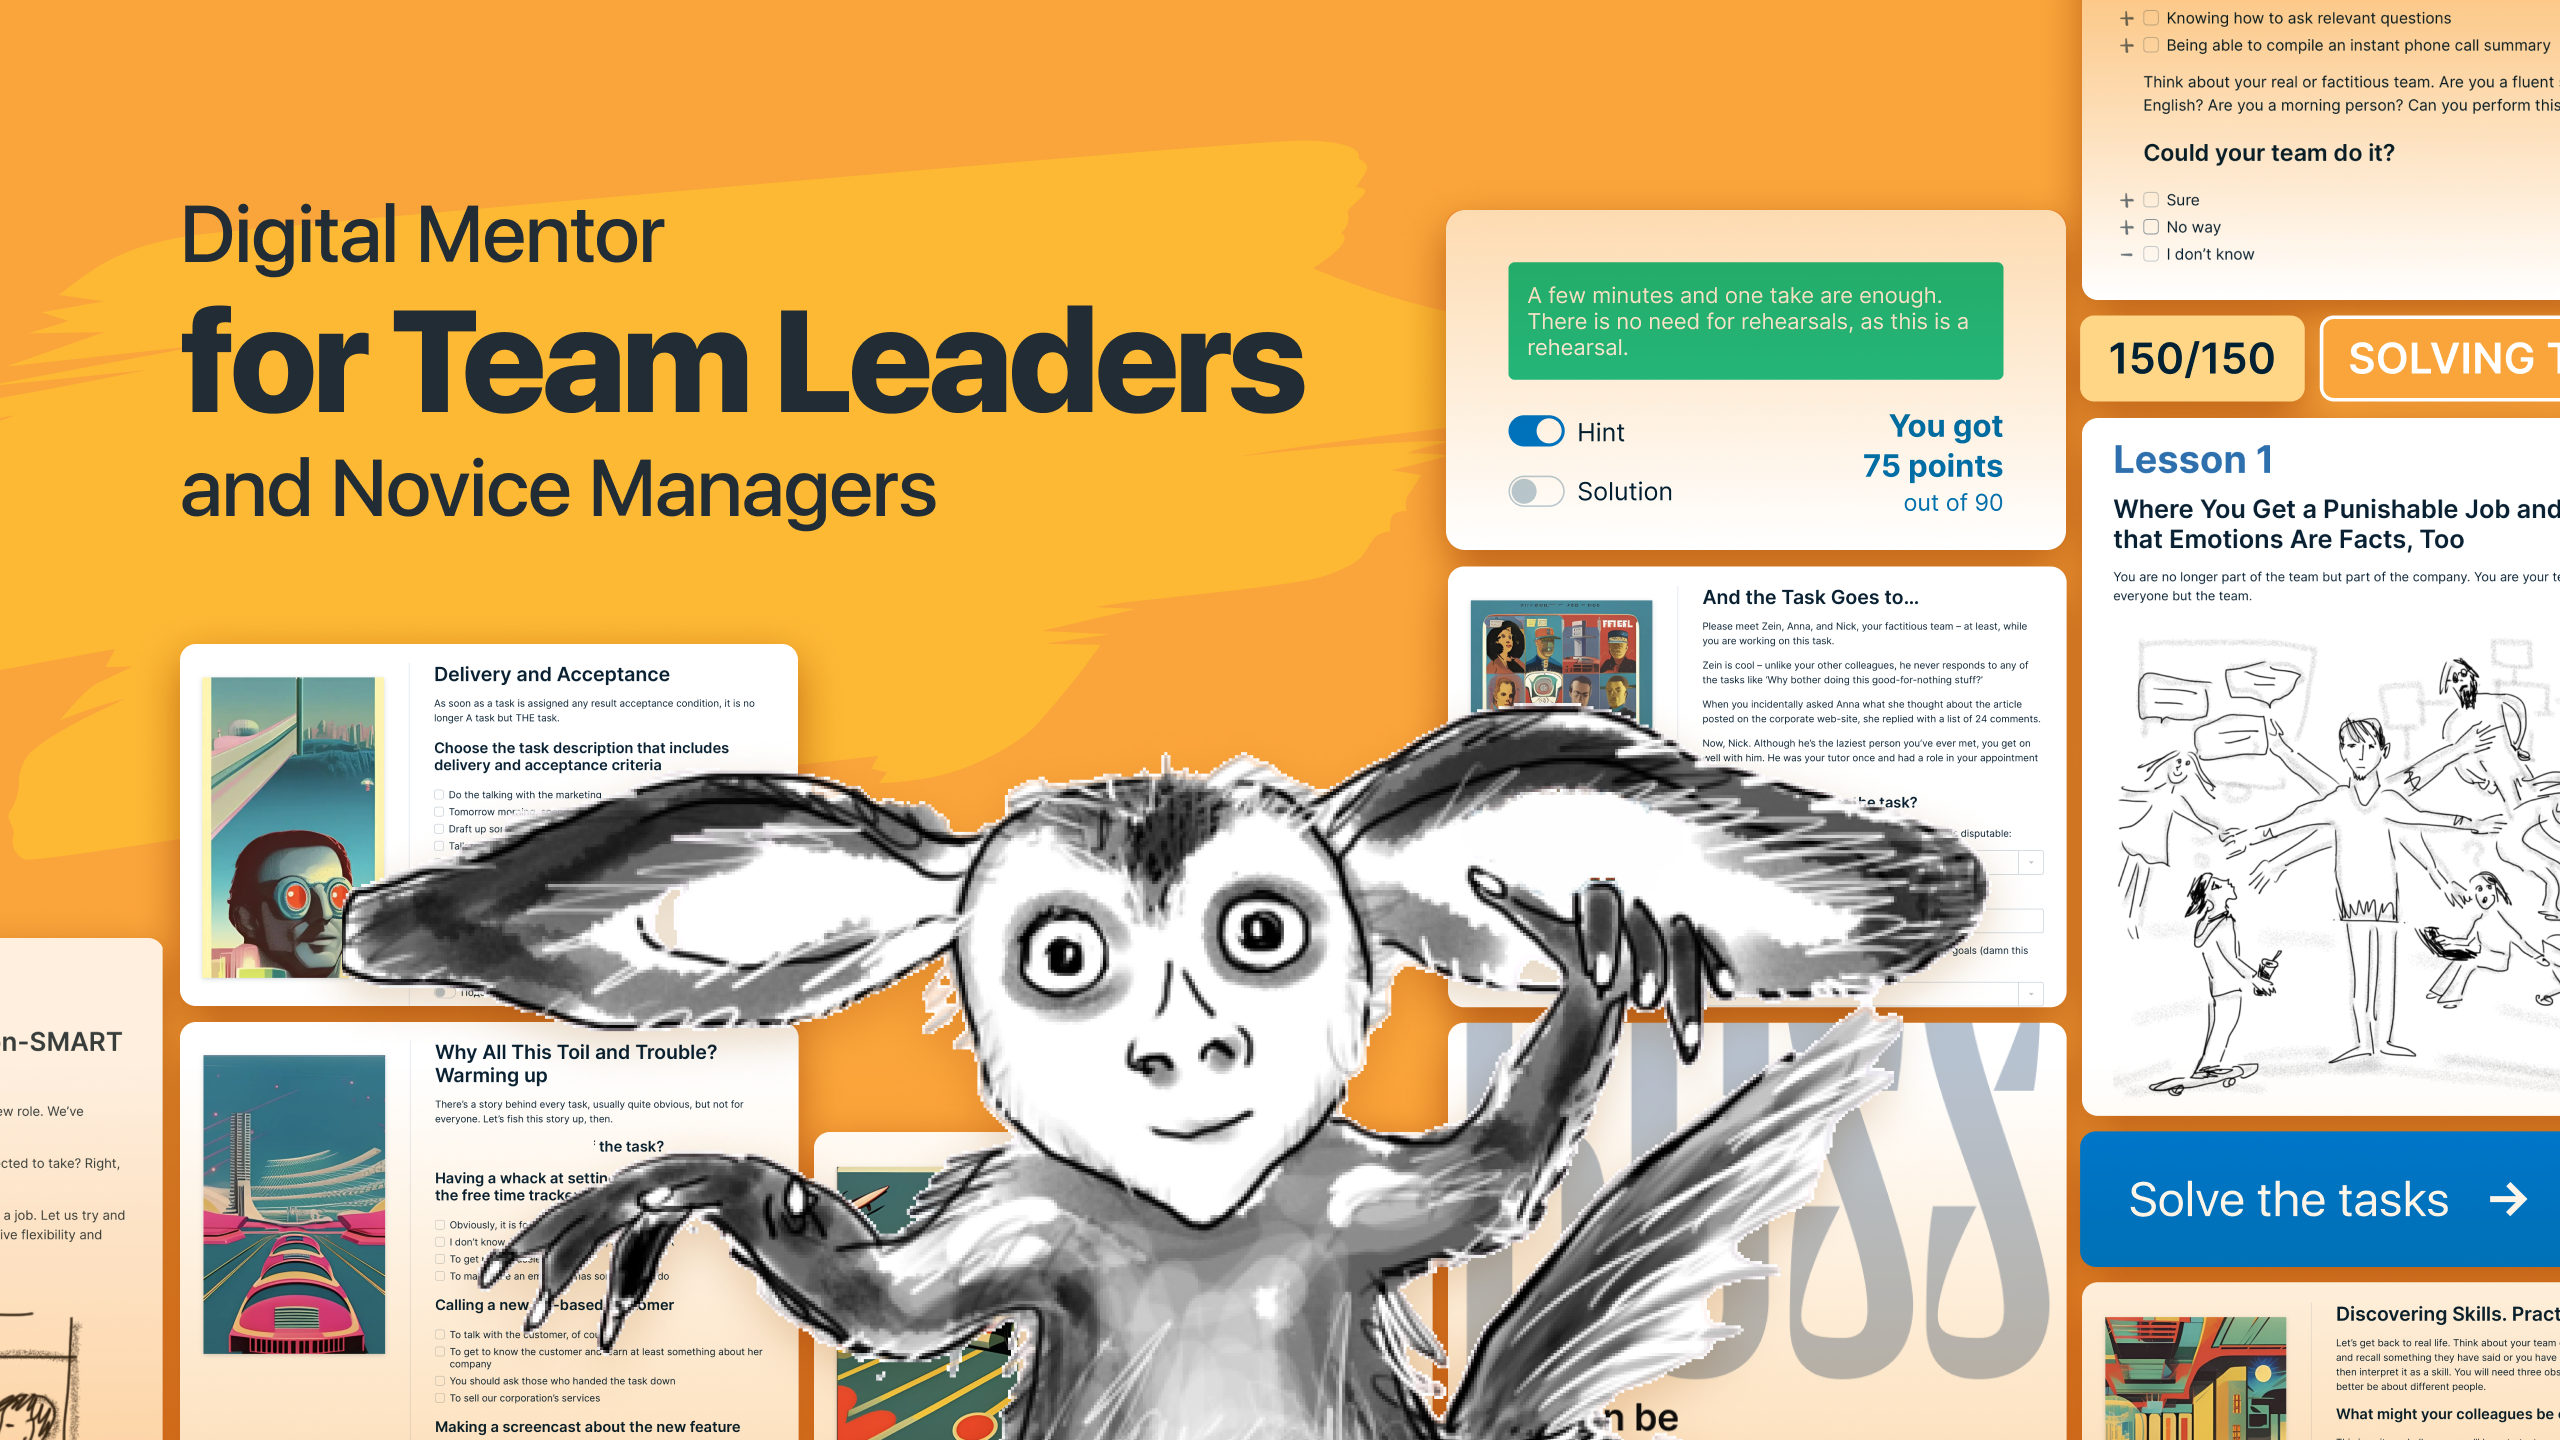 Digital Mentor for Team Leaders and Novice Managers